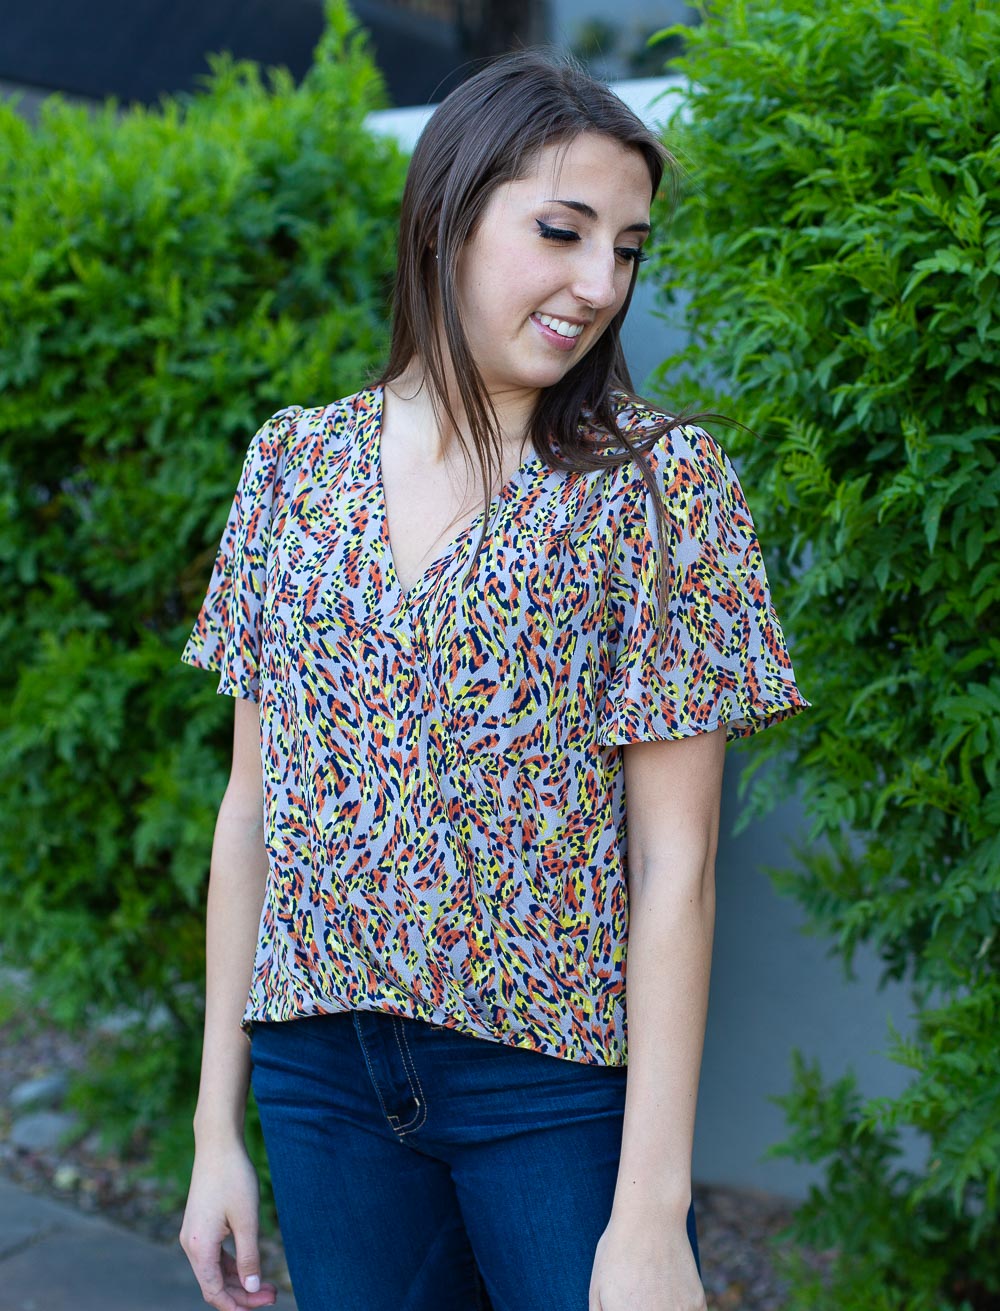 Cross front wrap top with high-low hemline, flutter sleeves and colorful abstract print